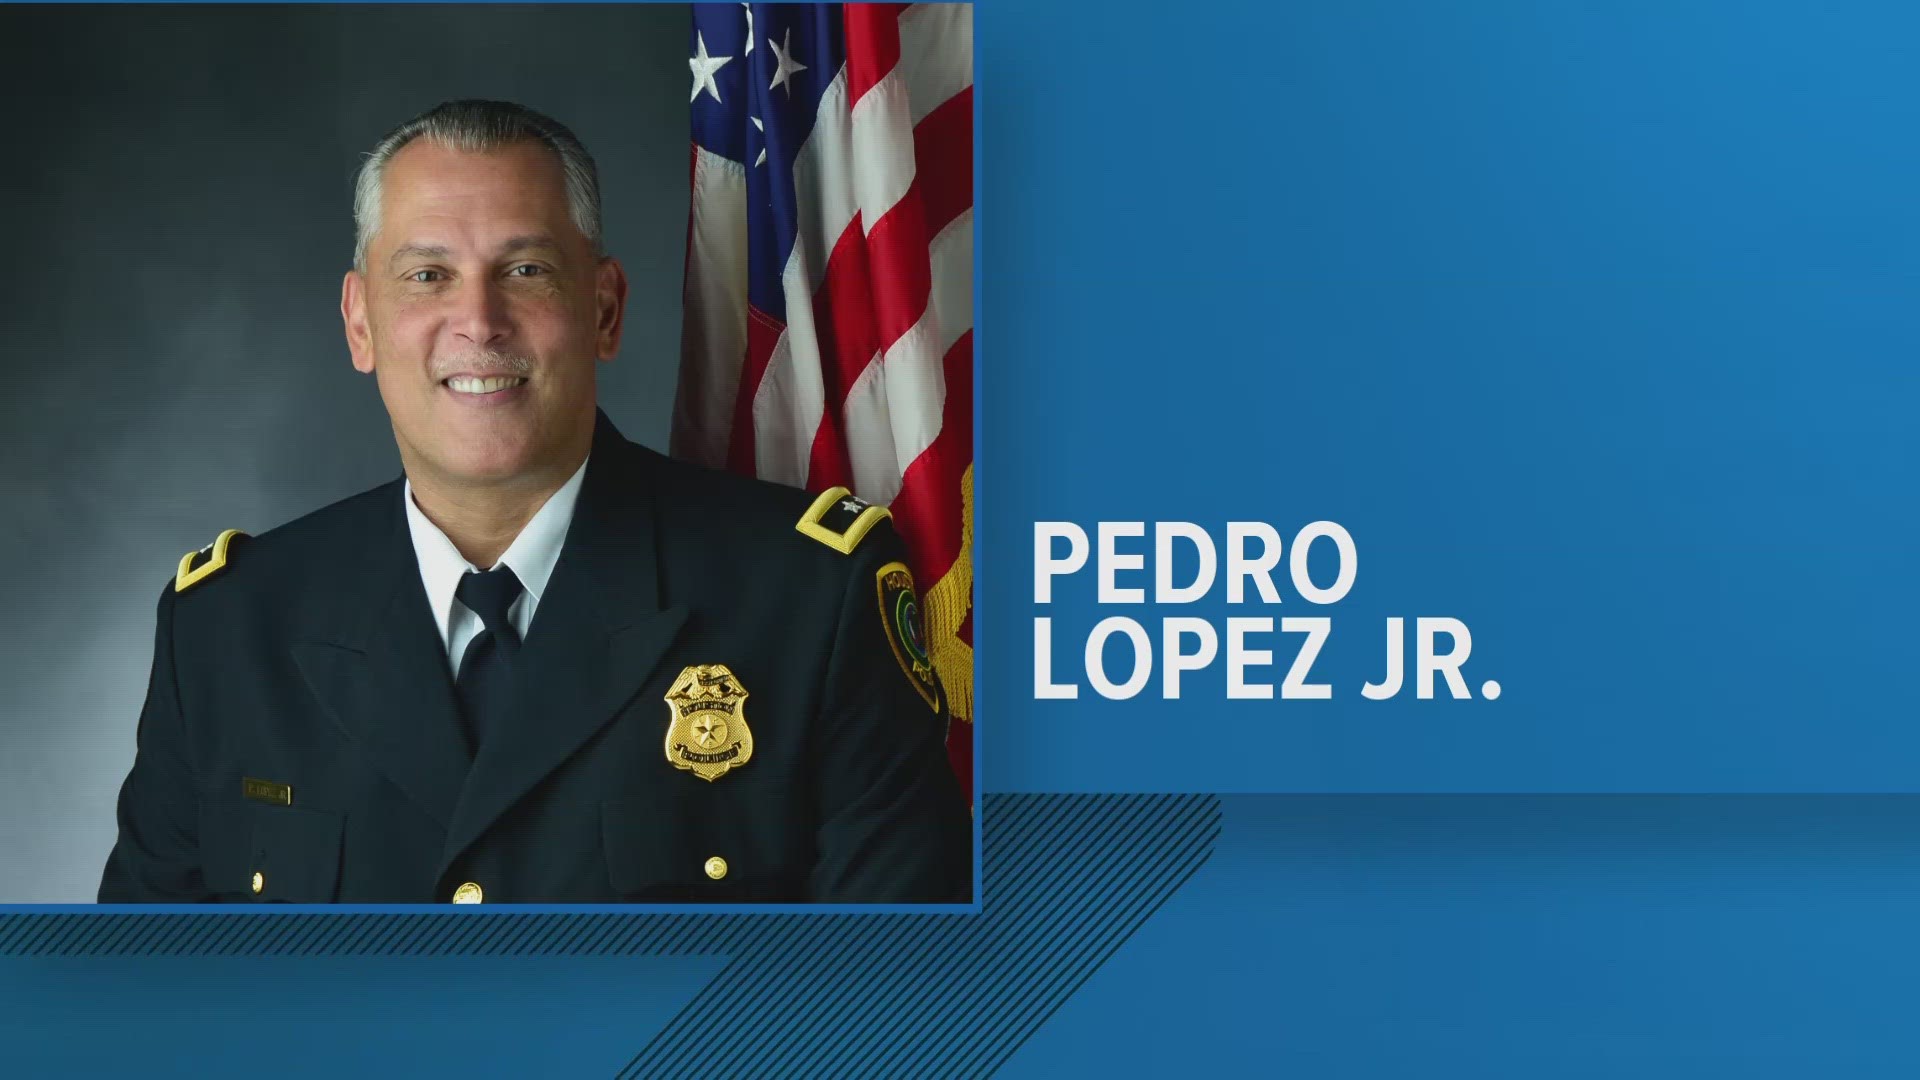 Pedro Lopez Jr. will be sworn in at a ceremony on June 5.